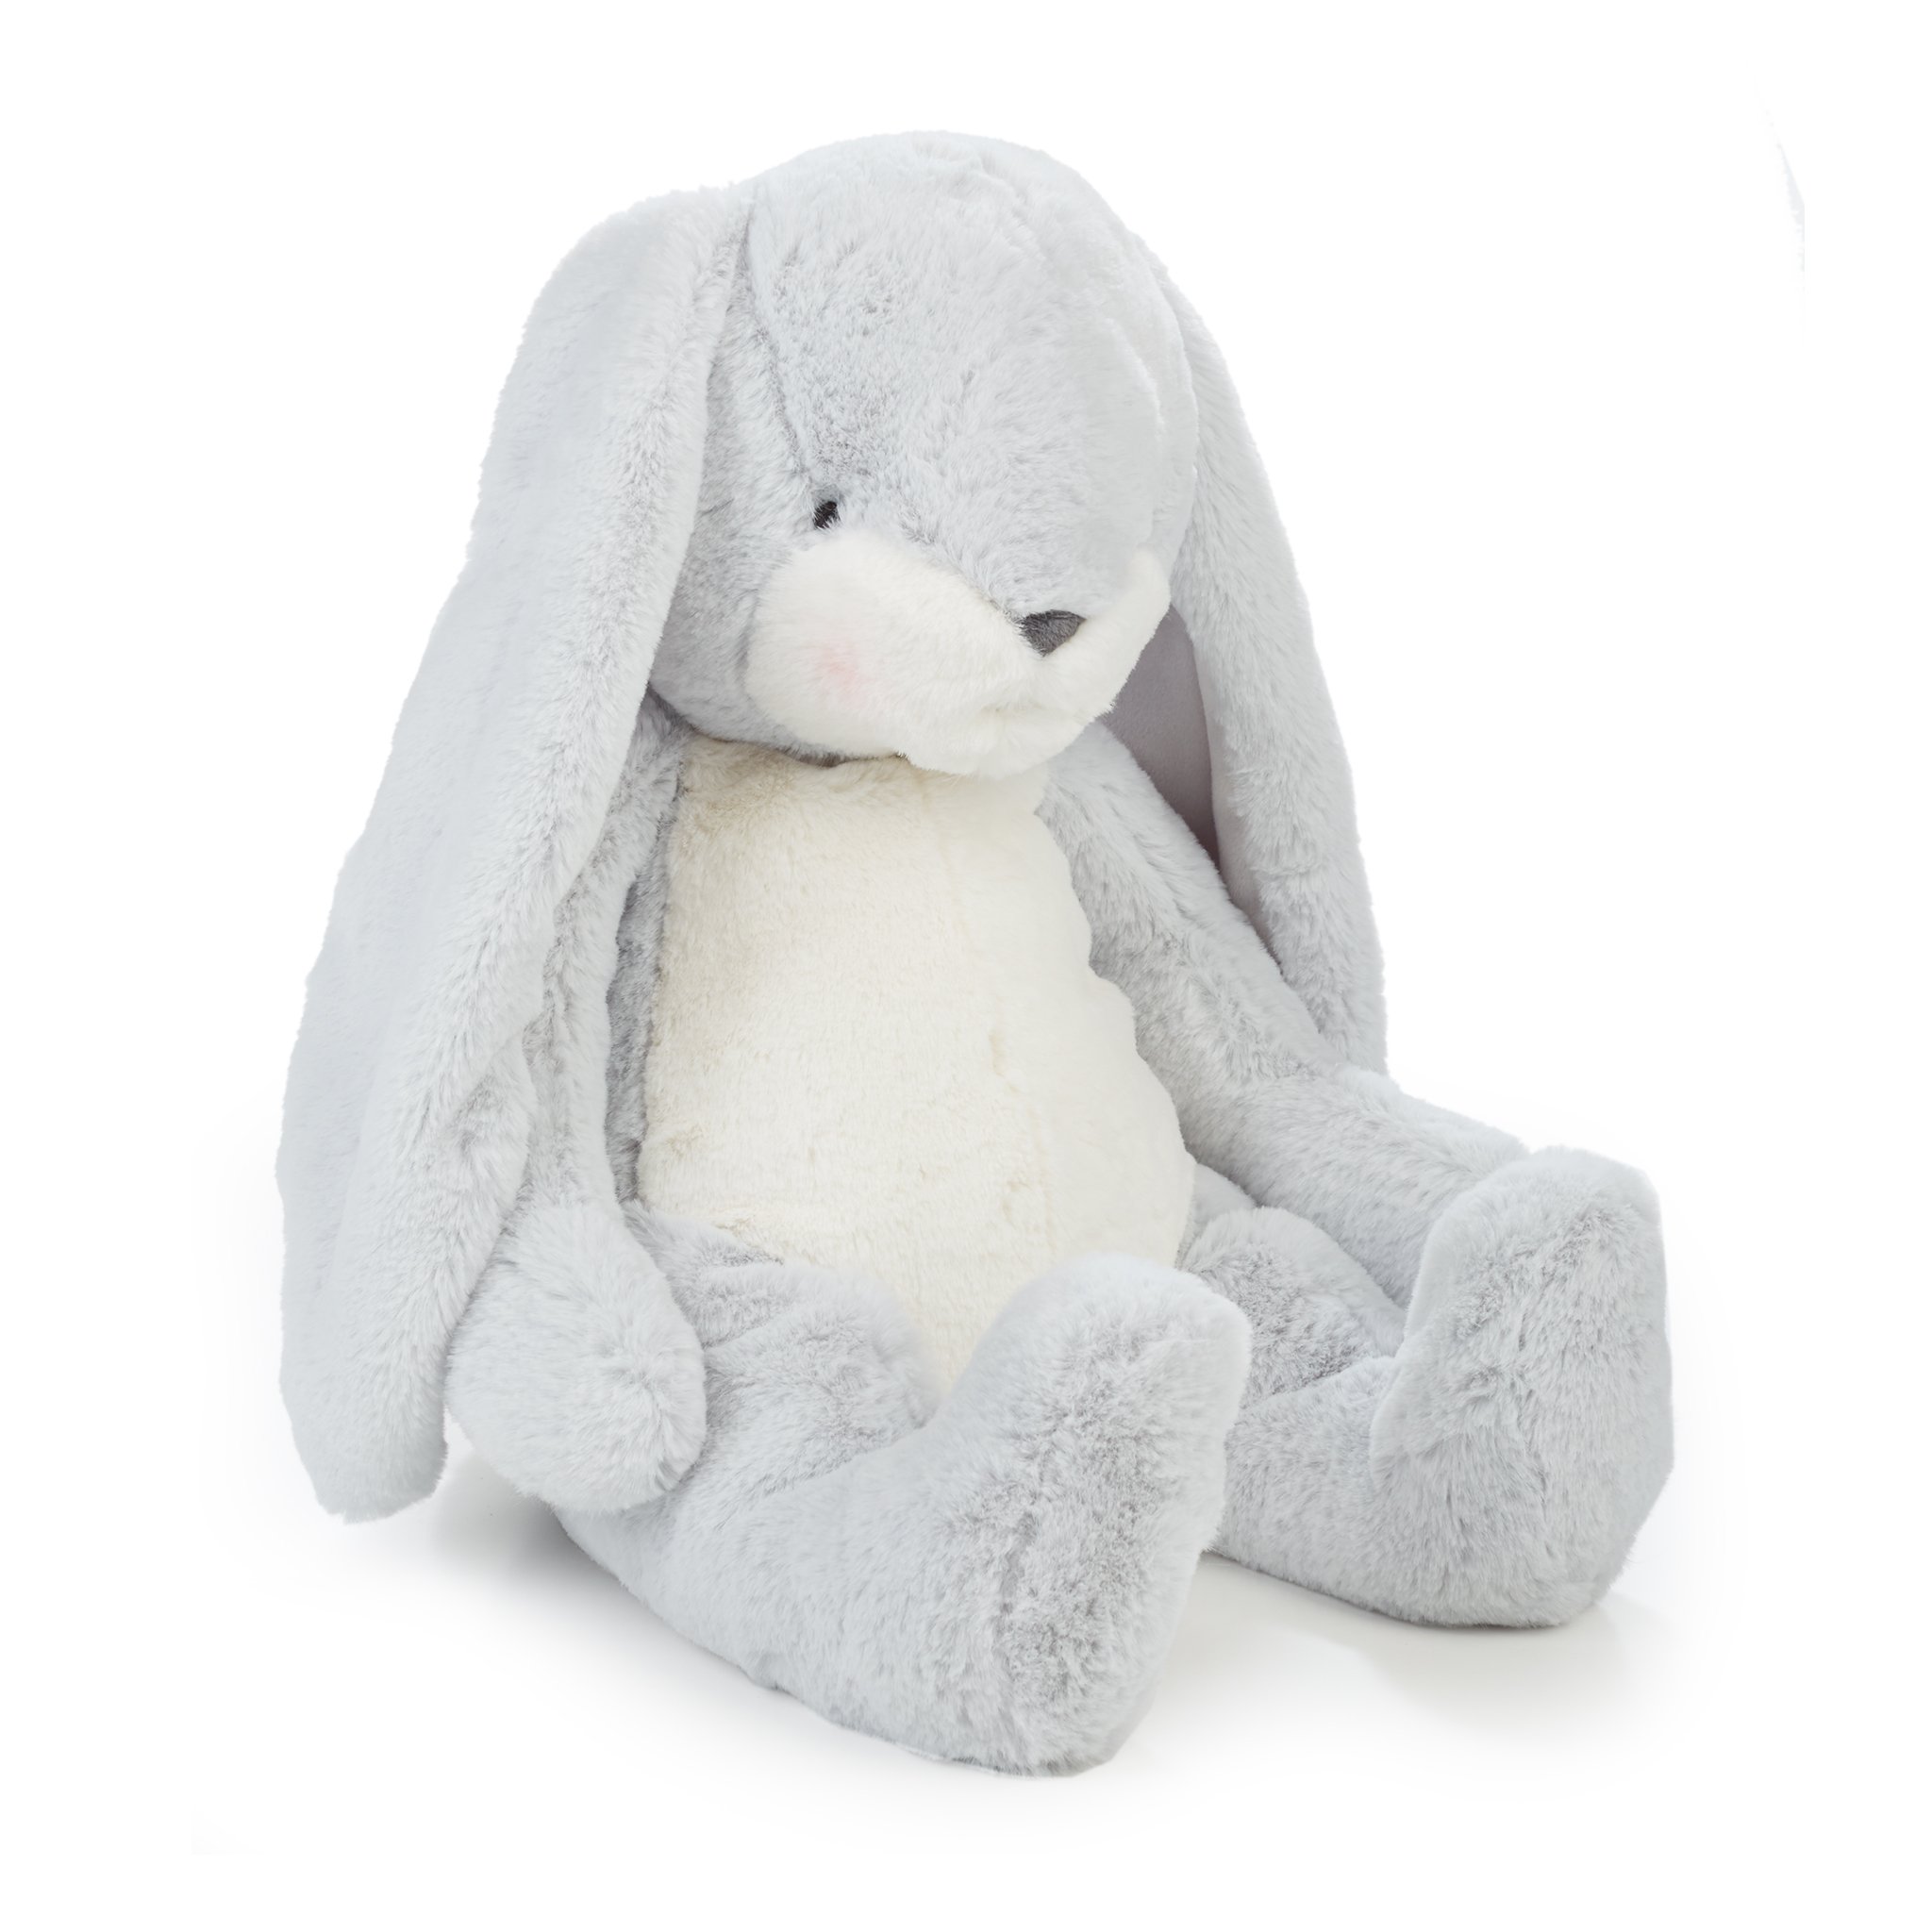 Big Nibble Bunny - Bunnies by the Bay Plush Toy